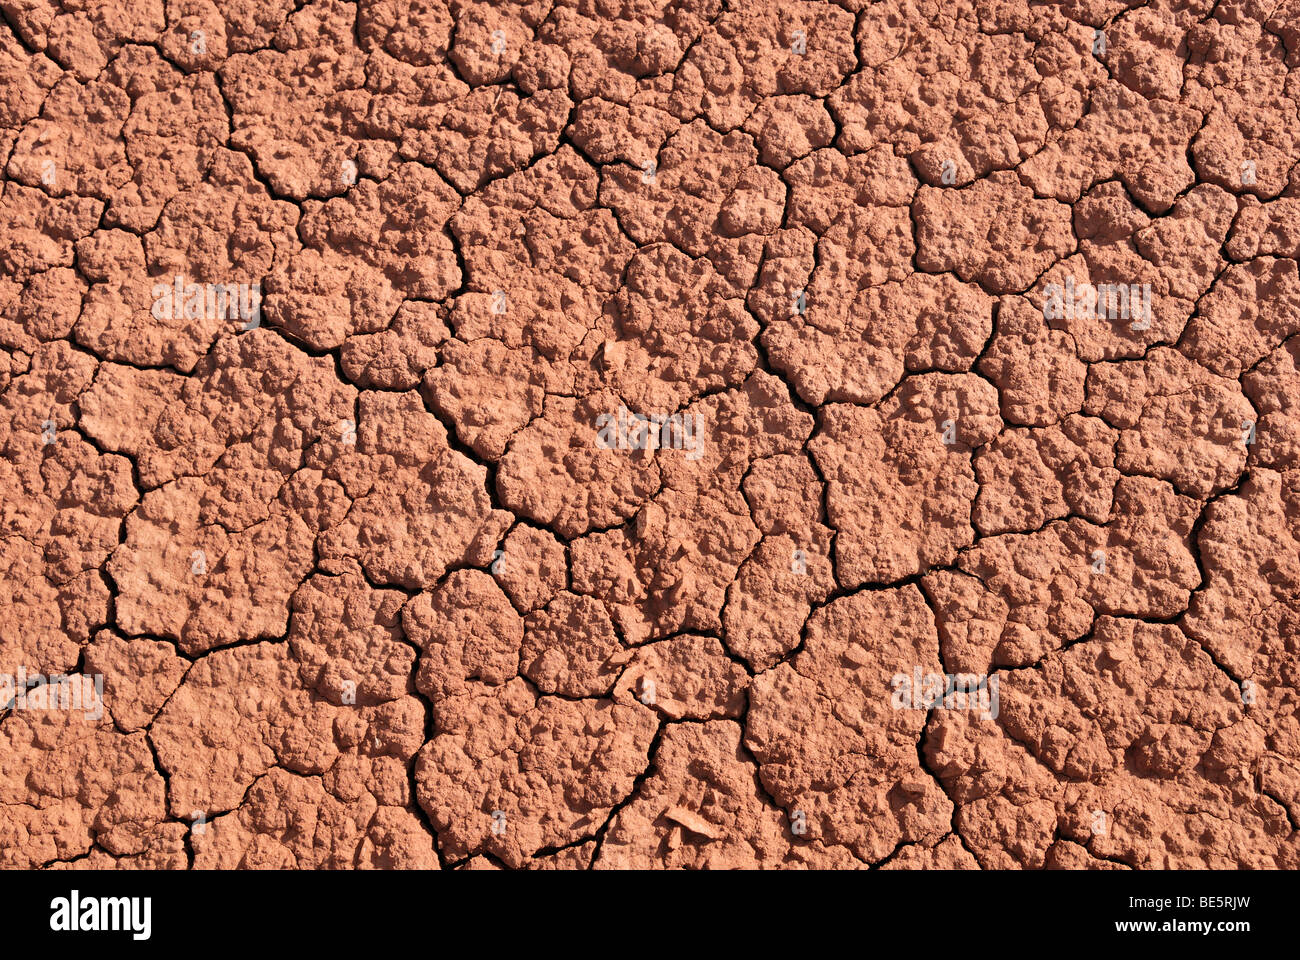 Dried puddle of water with cracks, Capitol Reef National Park, Utah, USA Stock Photo